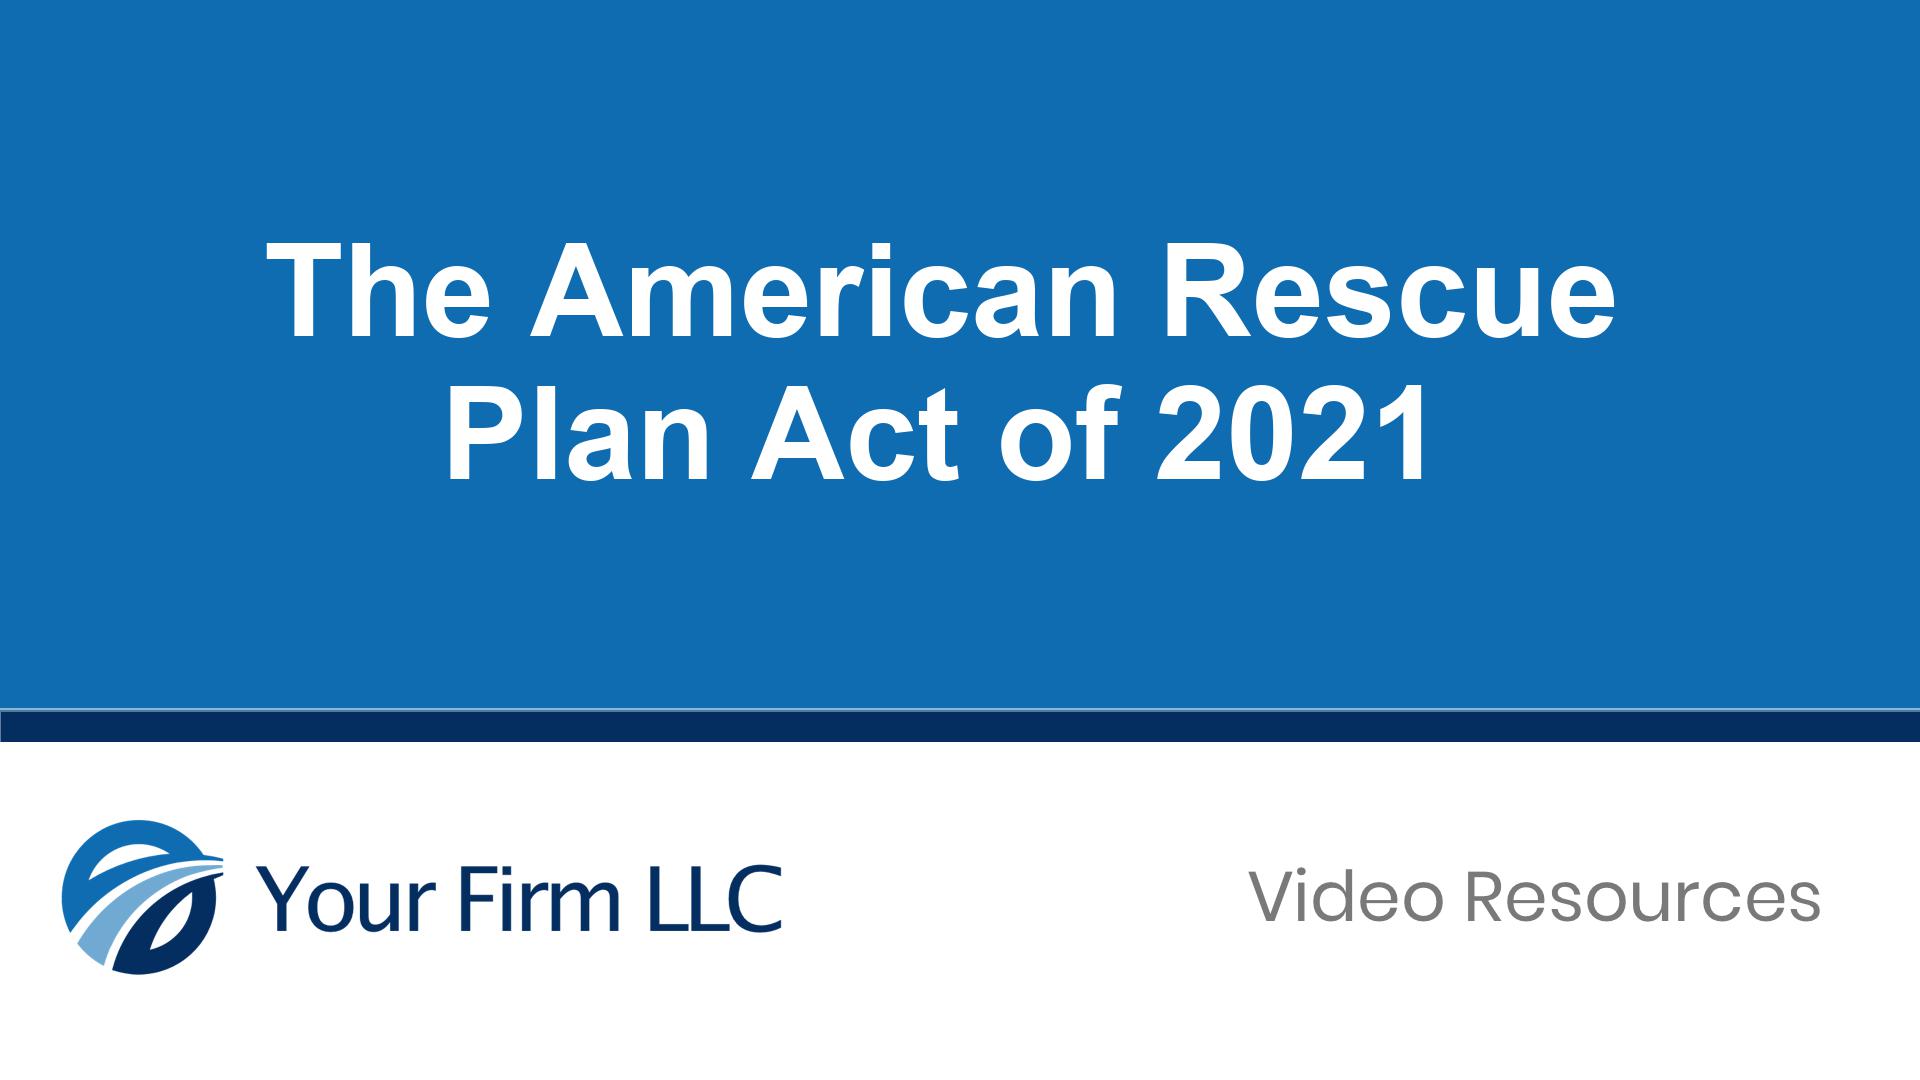 The American Rescue Plan Act of 2021